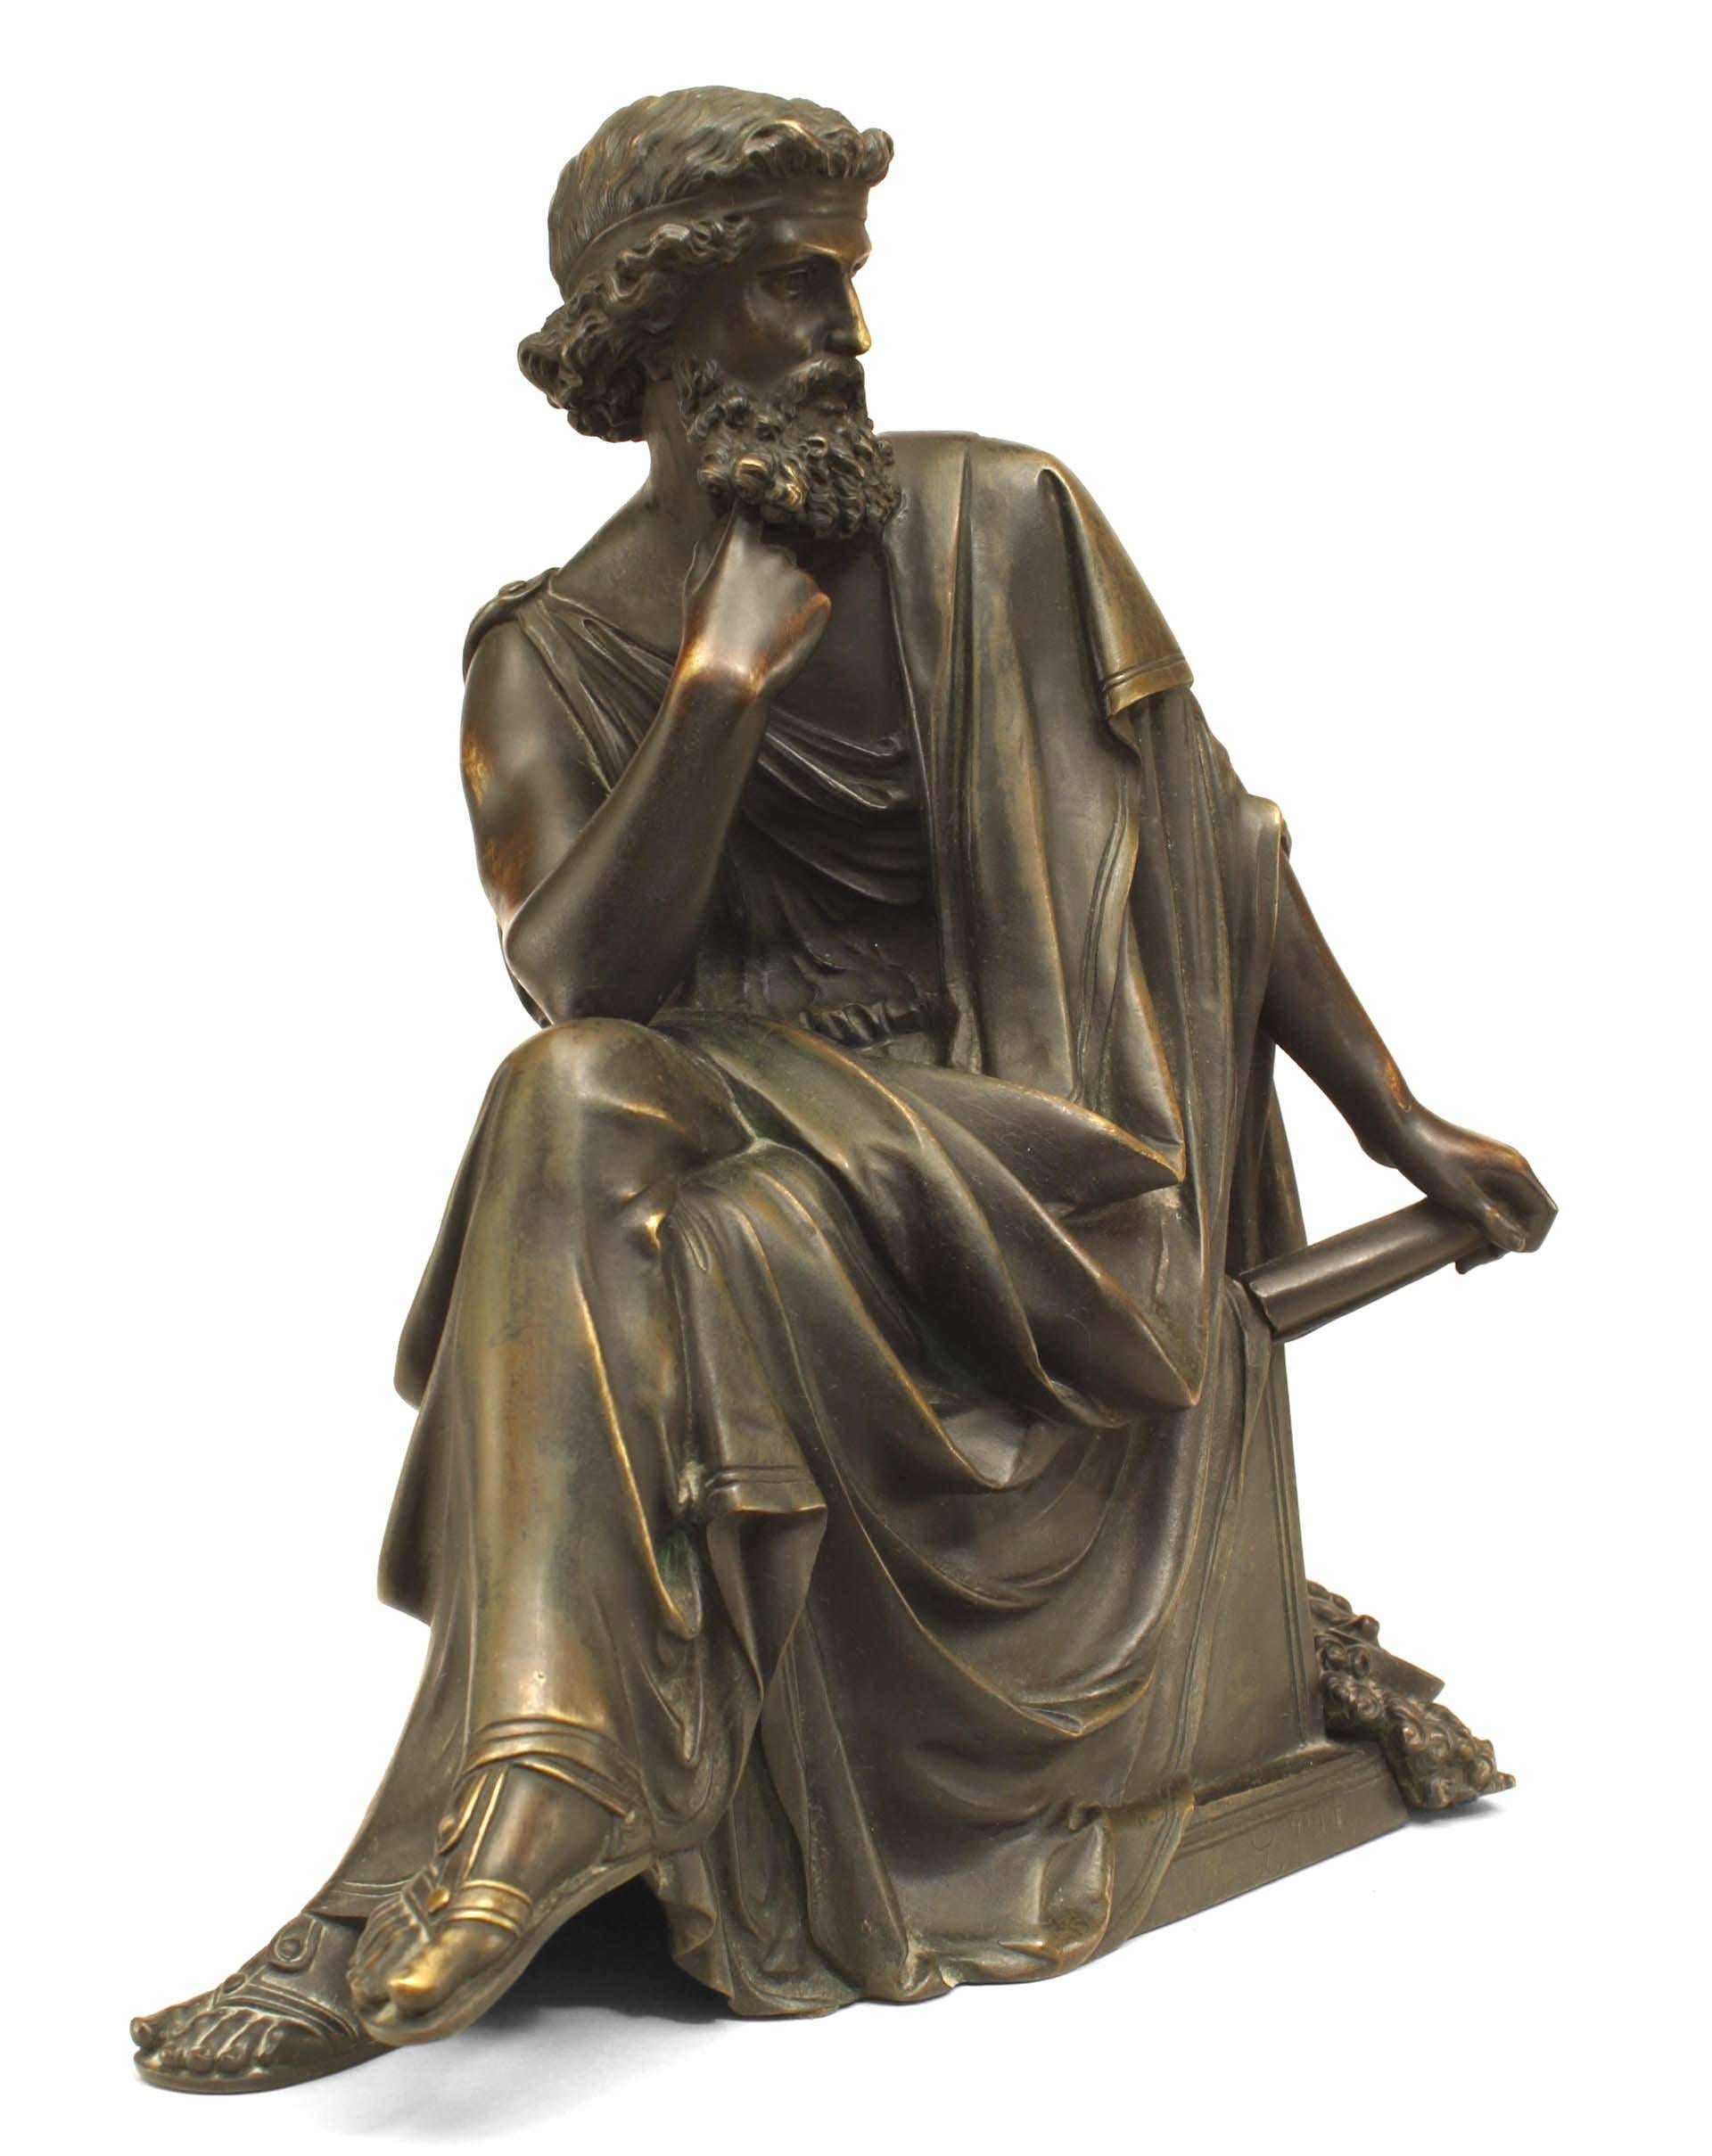 Bronze Grecian figure of a seated man with a beard wearing a toga and holding a paper with a theatrical mask on side of base (probably French, 19th Cent. Signed: L. PILET)
